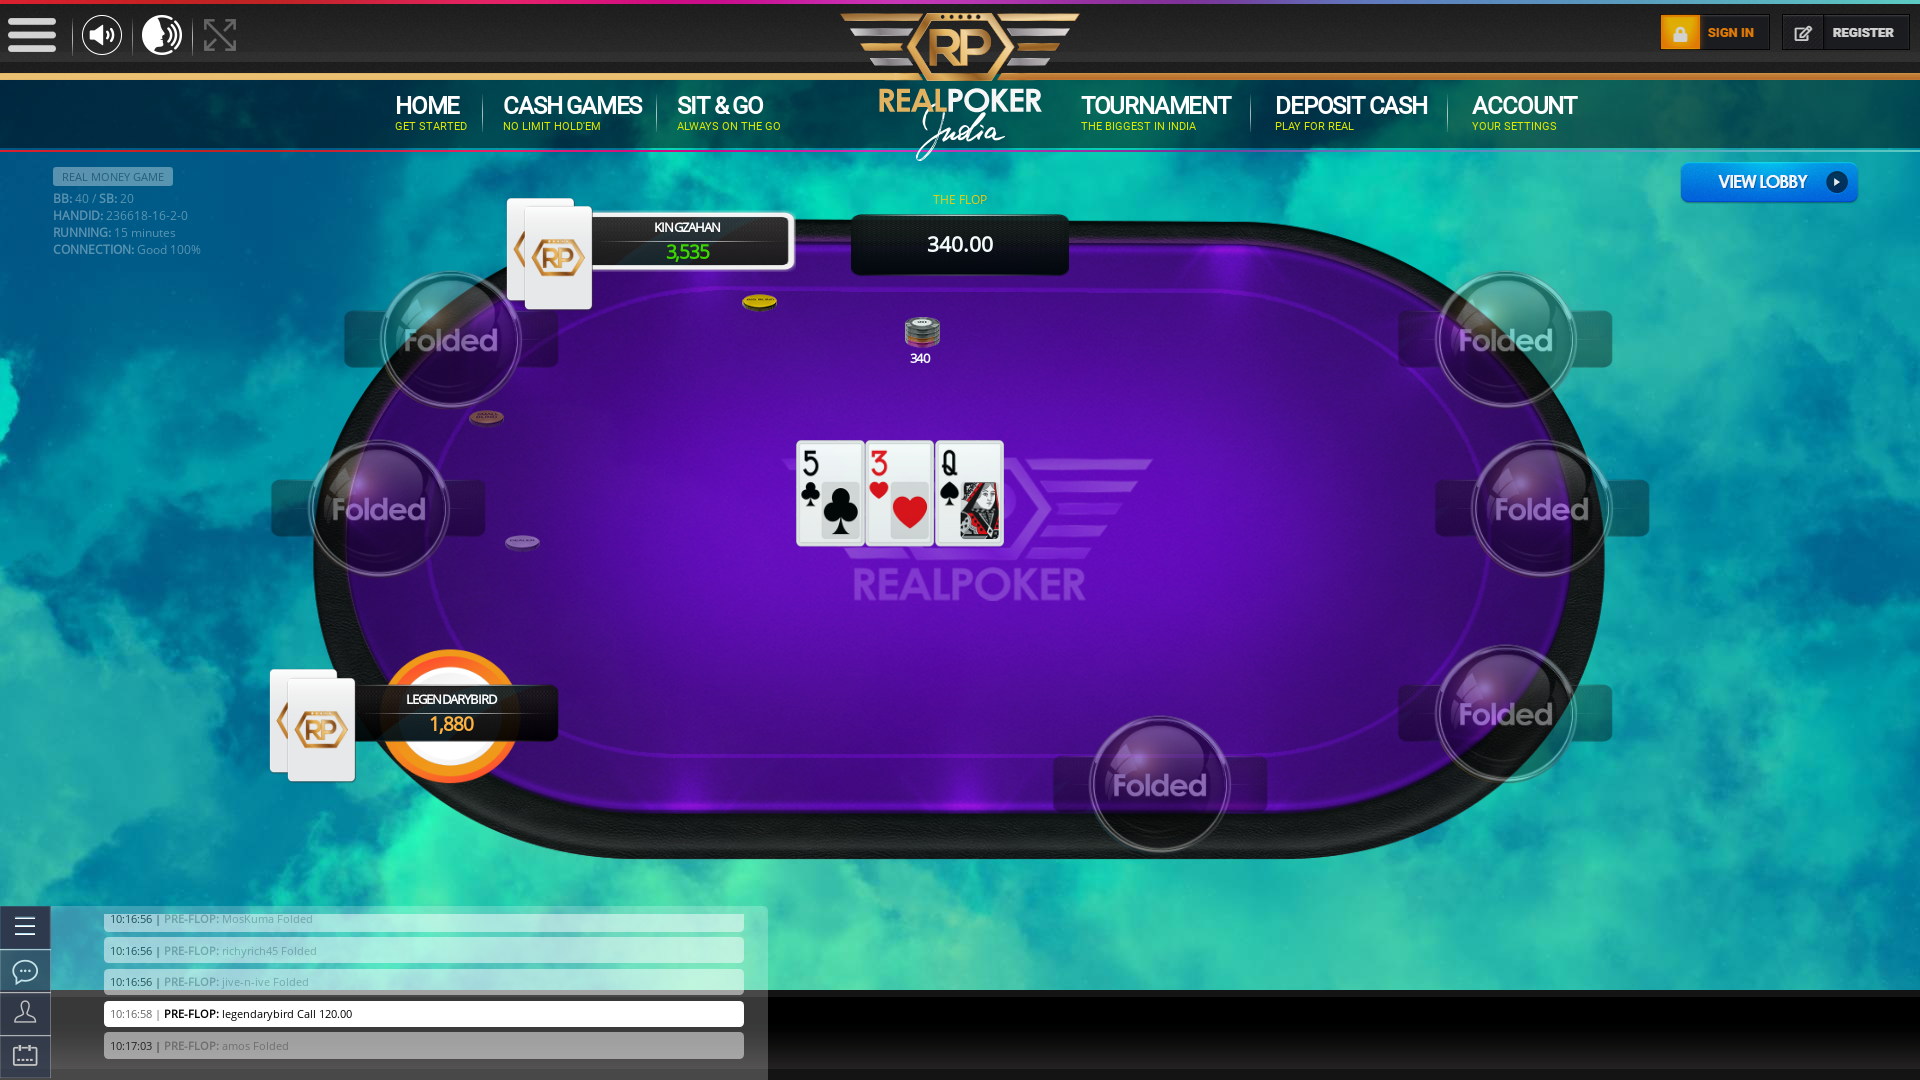 Real Indian poker on a 10 player table in the 15th minute of the game